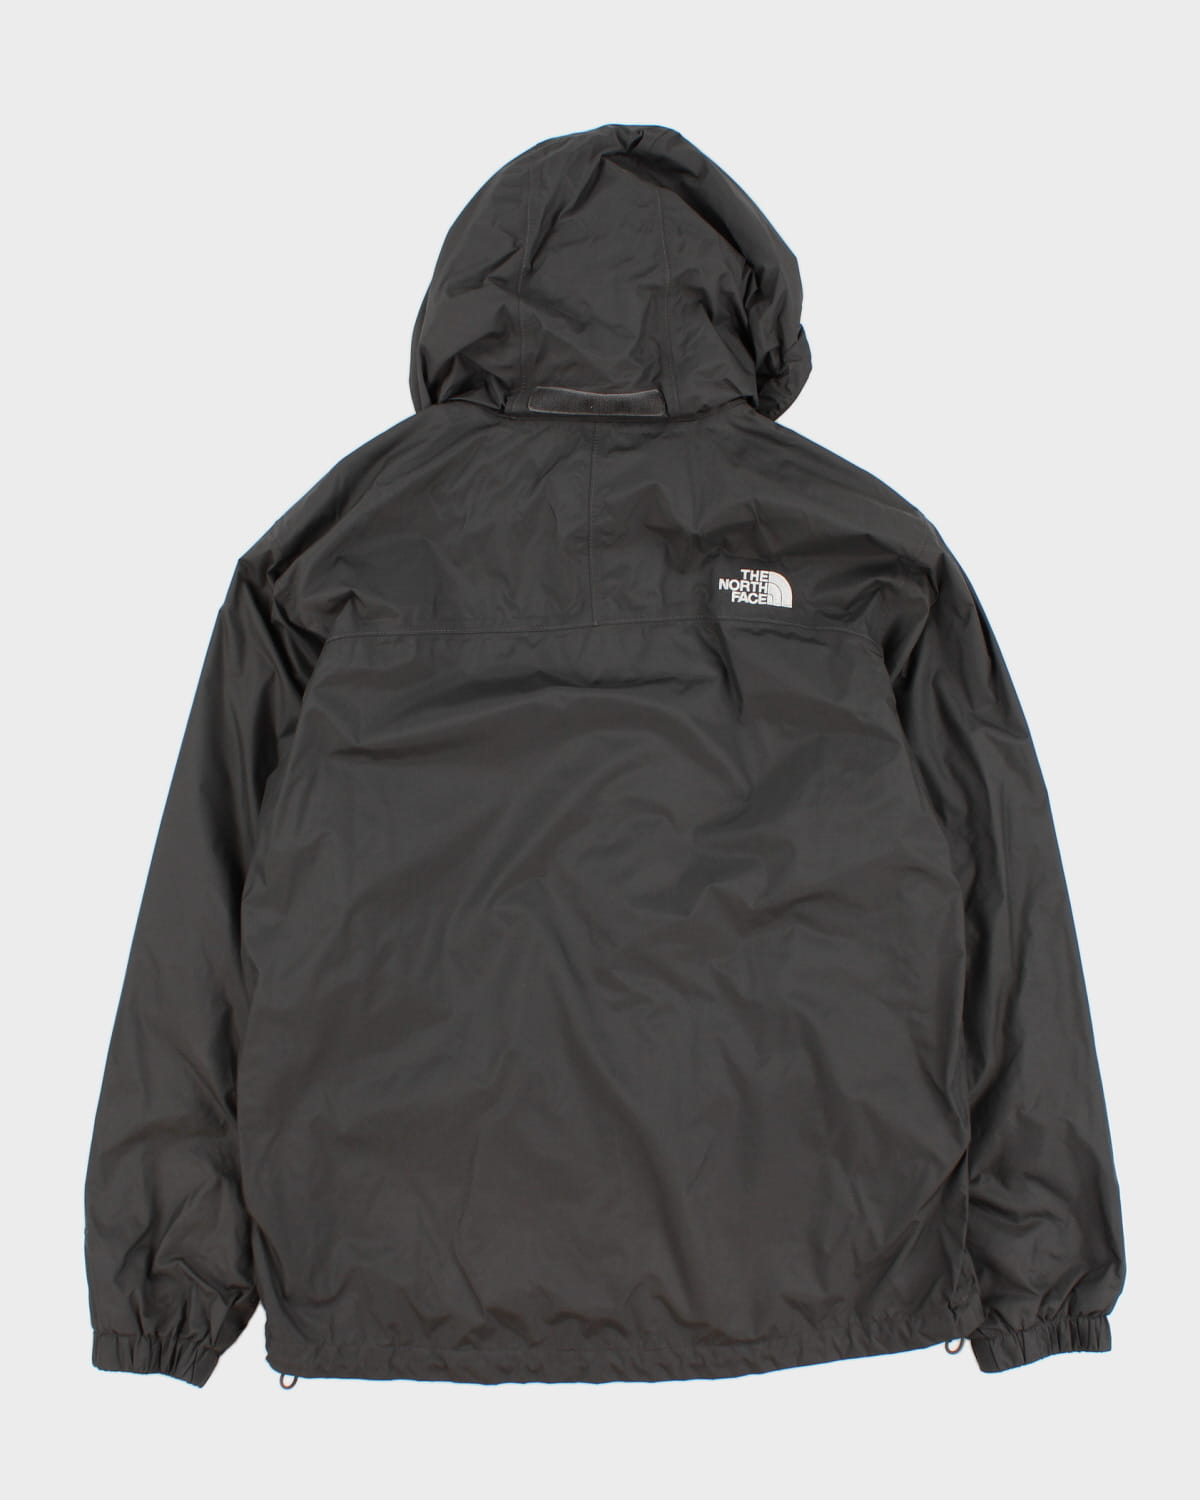 The North Face Black Hooded Jacket - S